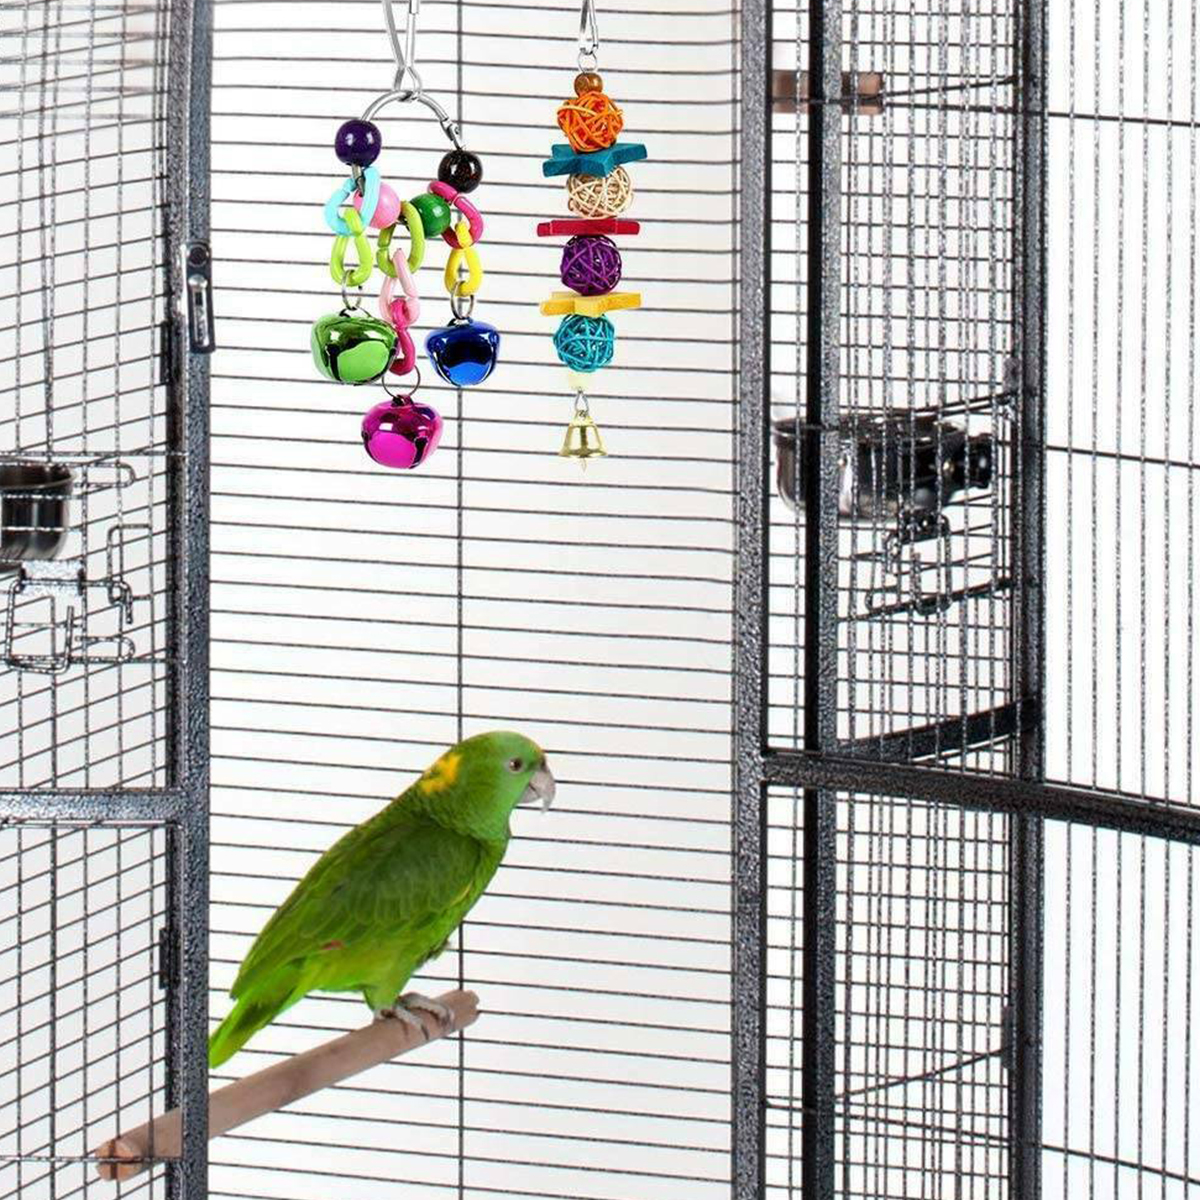 7PcsSet-Combination-Parrot-Toy-Bird-Articles-Parrot-Bite-Toy-Parrot-Funny-Swing-Ball-Bell-Standing-T-1703265-3